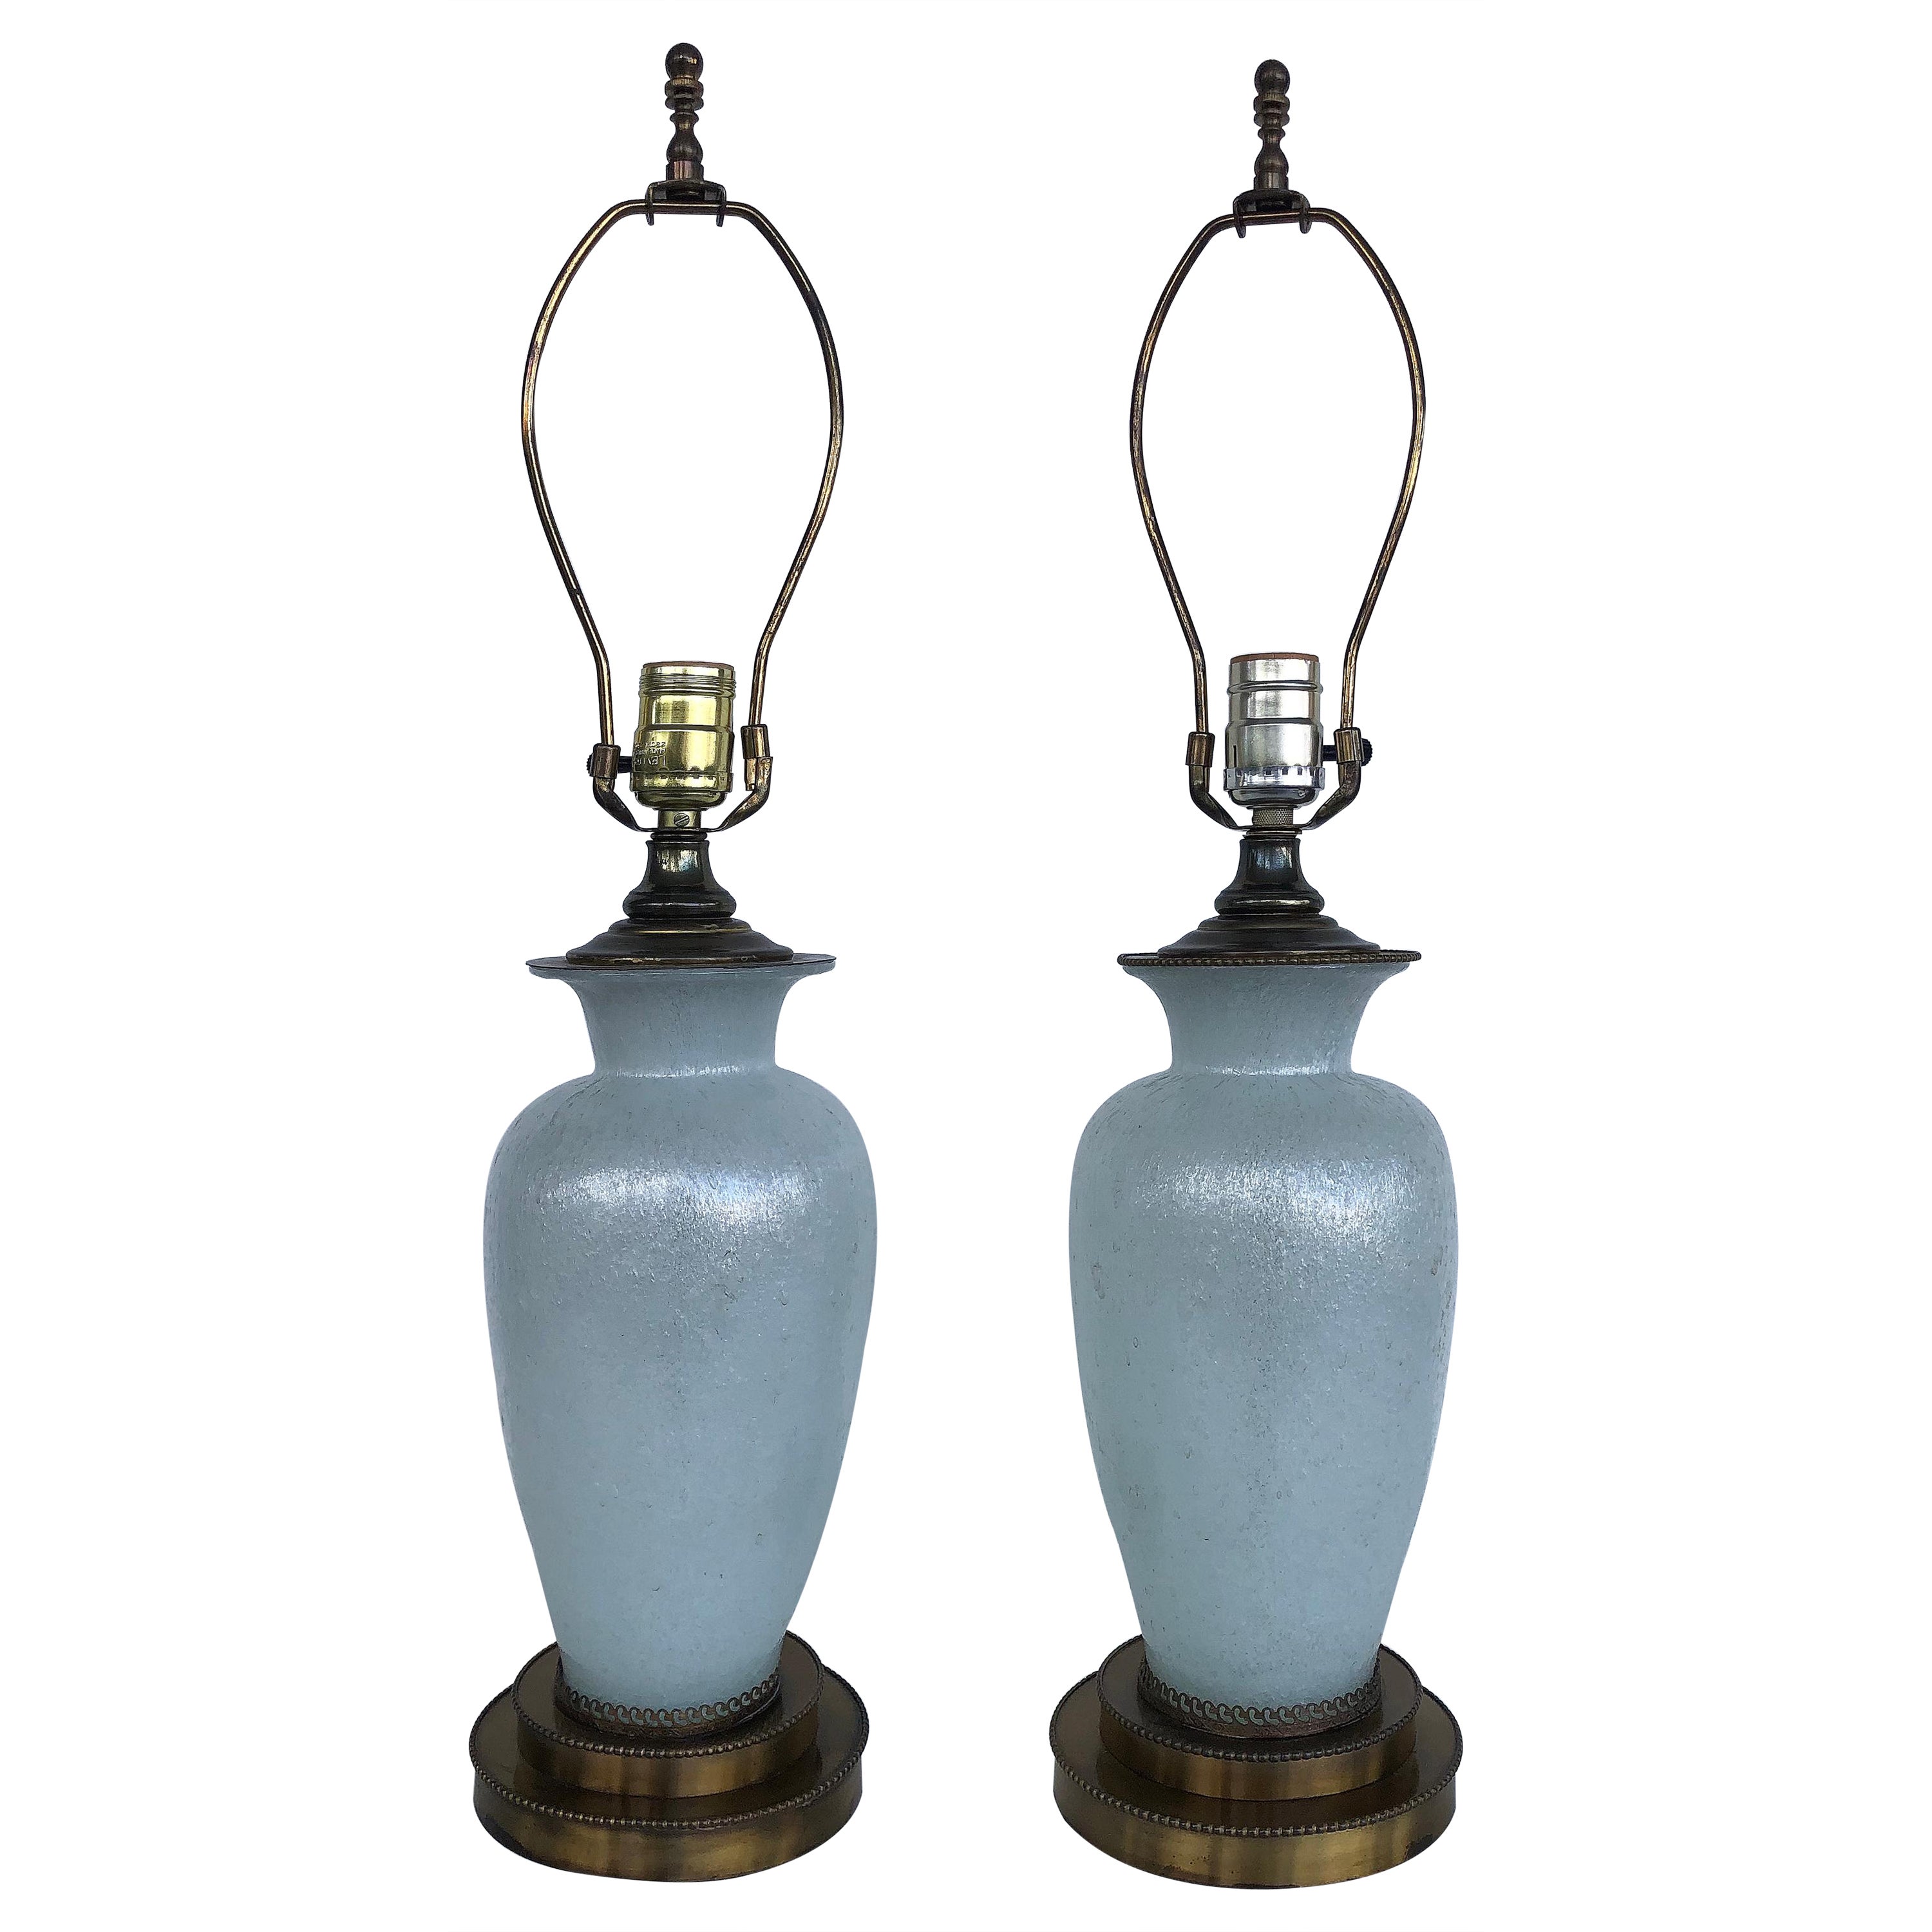 Vintage Murano Textured Pearlized Glass Table Lamps, Pair